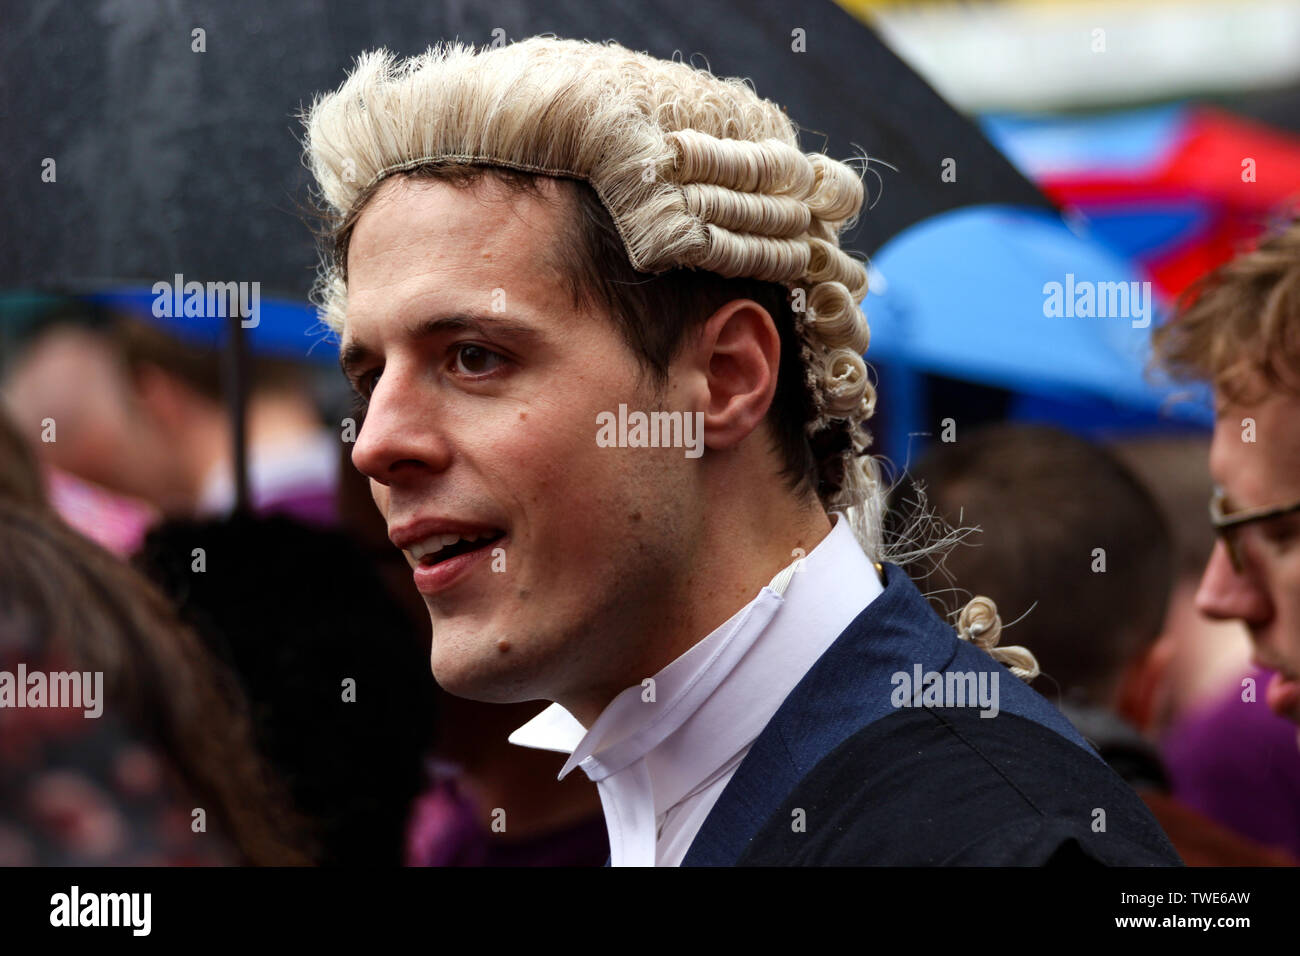 Mann mit Barrister Perücke in Pride in London Parade 2014 in London, England Stockfoto